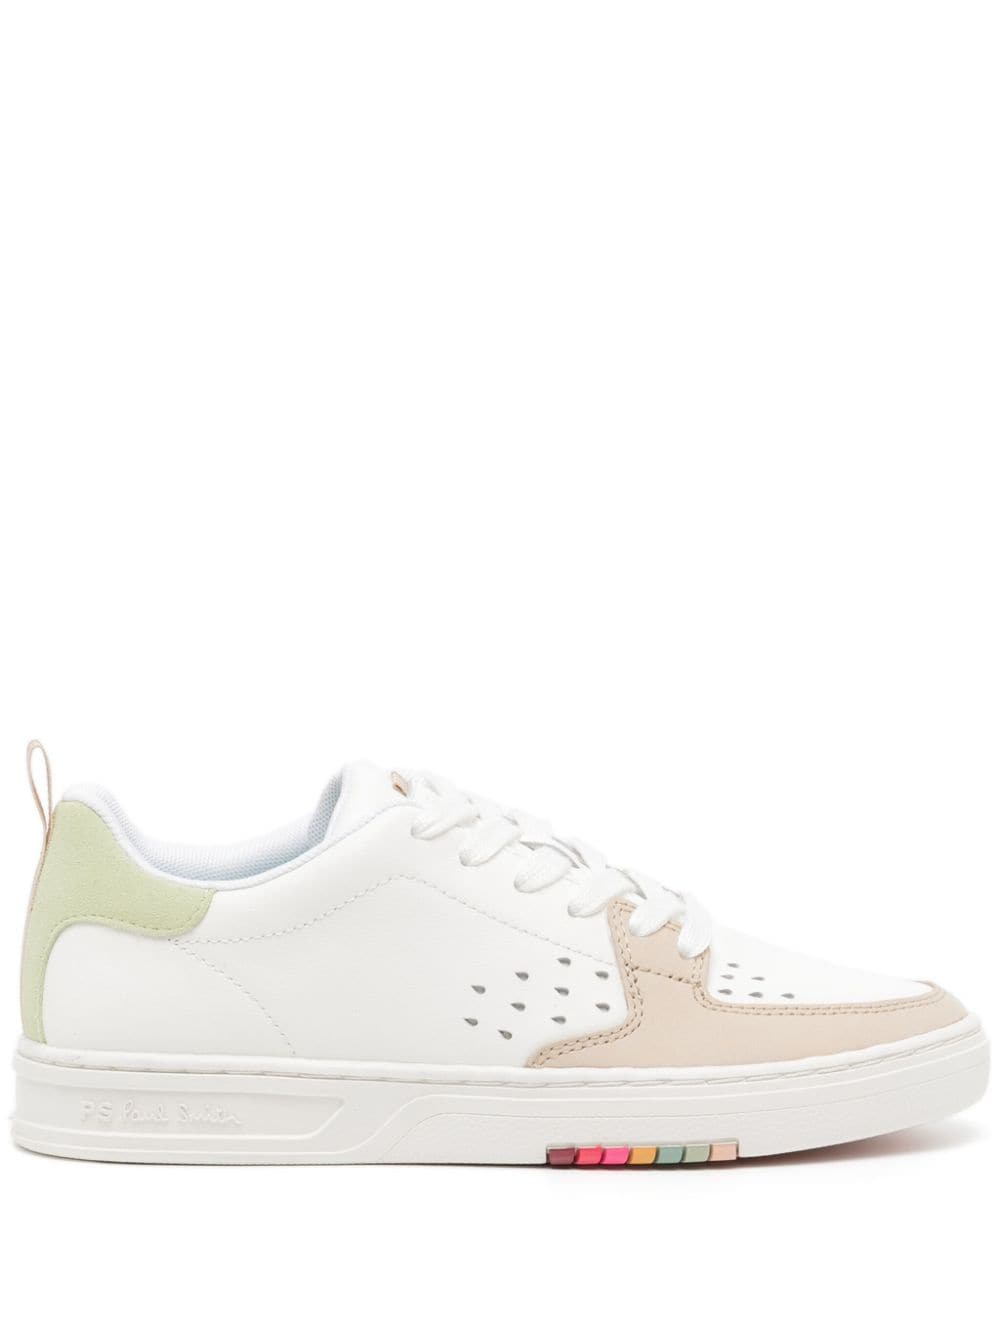 Paul Smith Cosmo Leather Trainers In White